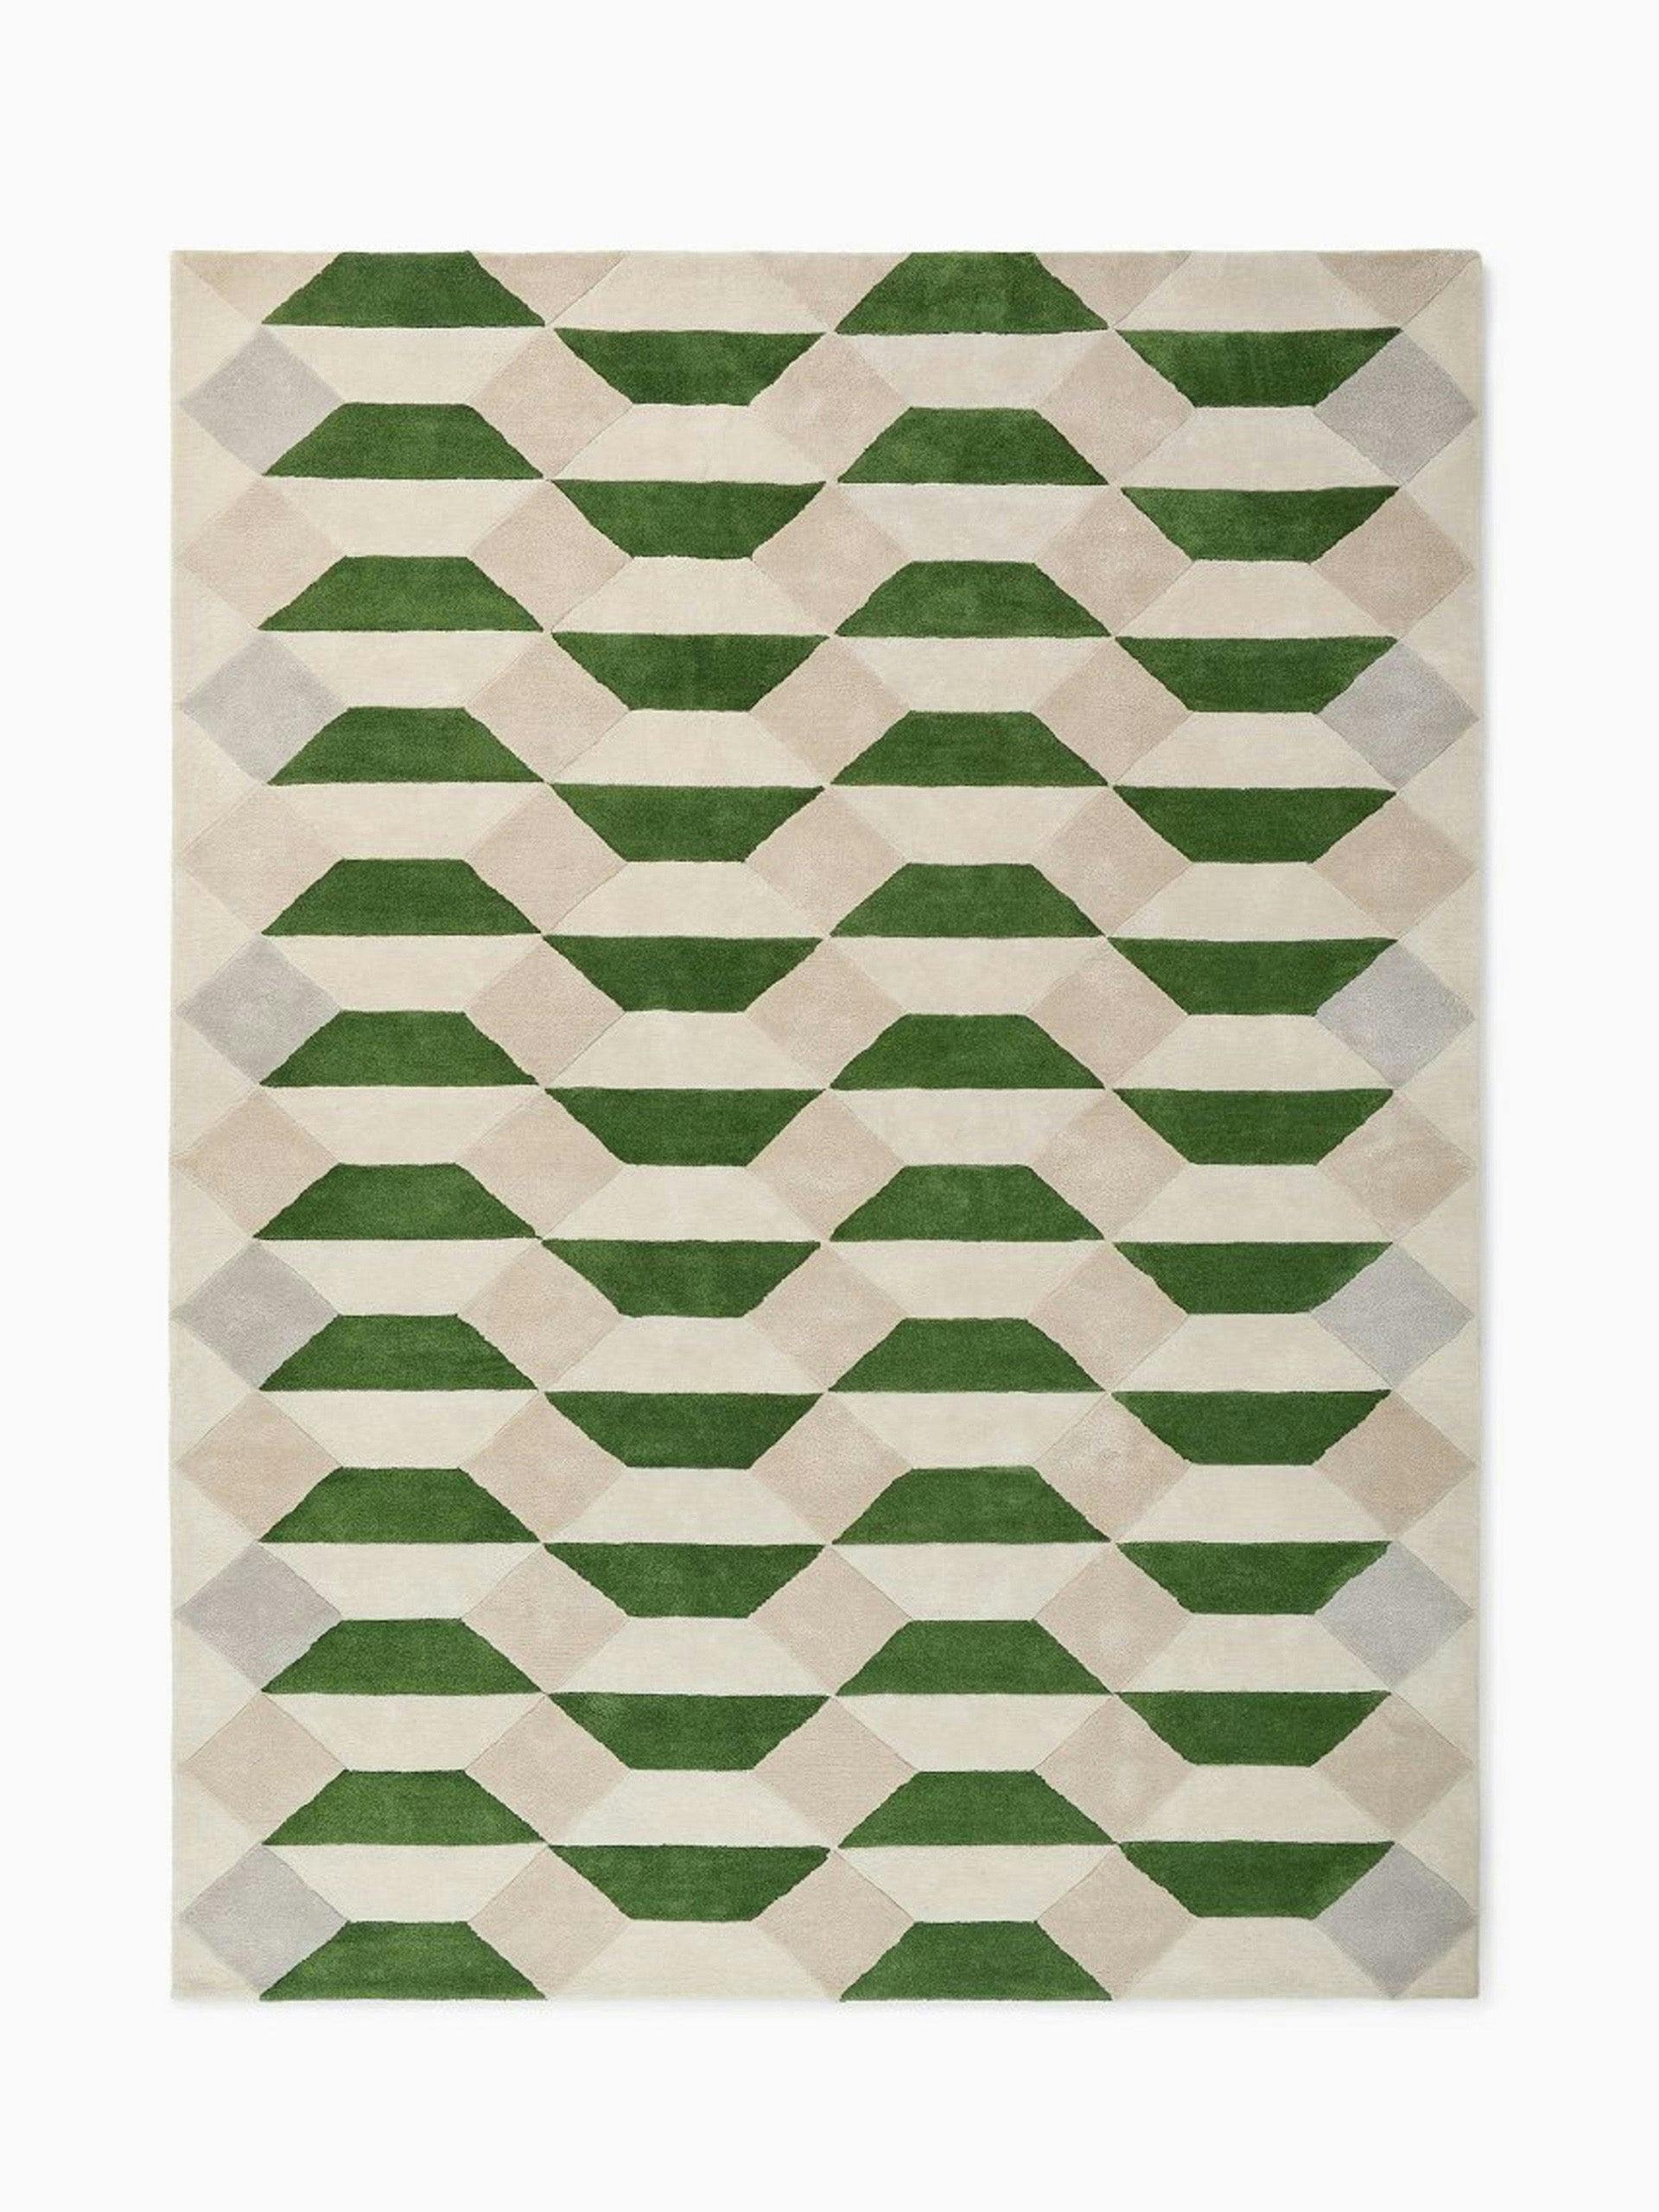 Green and cream tile rug